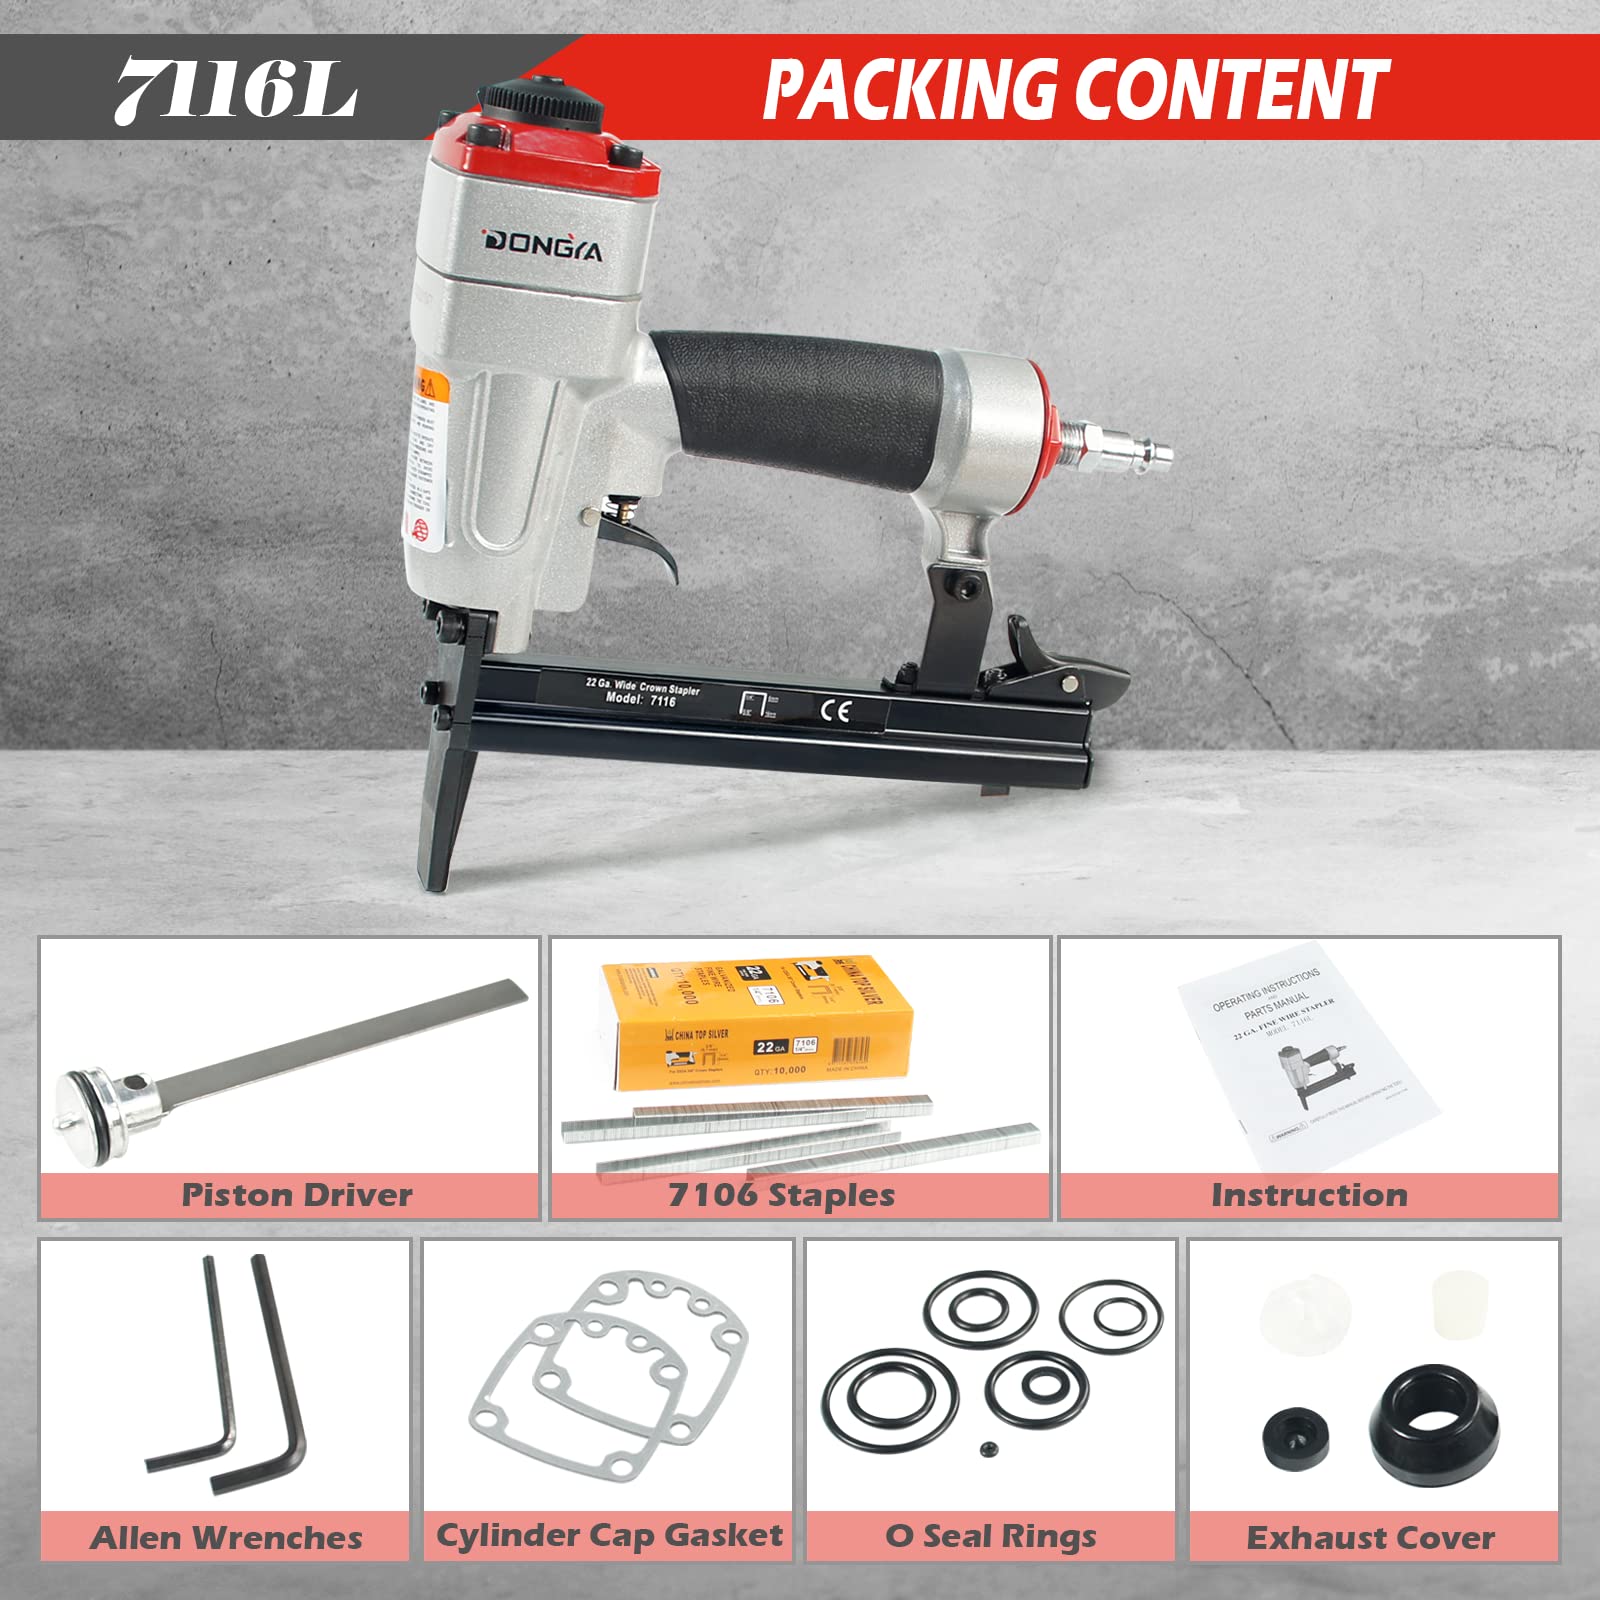 Dongya 7116L Pneumatic Upholstery Stapler with 10,000 PCS Staples, 22 Gauge 1/4'' to 5/8'' Length, 3/8'' Crown Long Nose Staple Gun, Air Power Fine Wire Stapler for Upholstering & Furniture